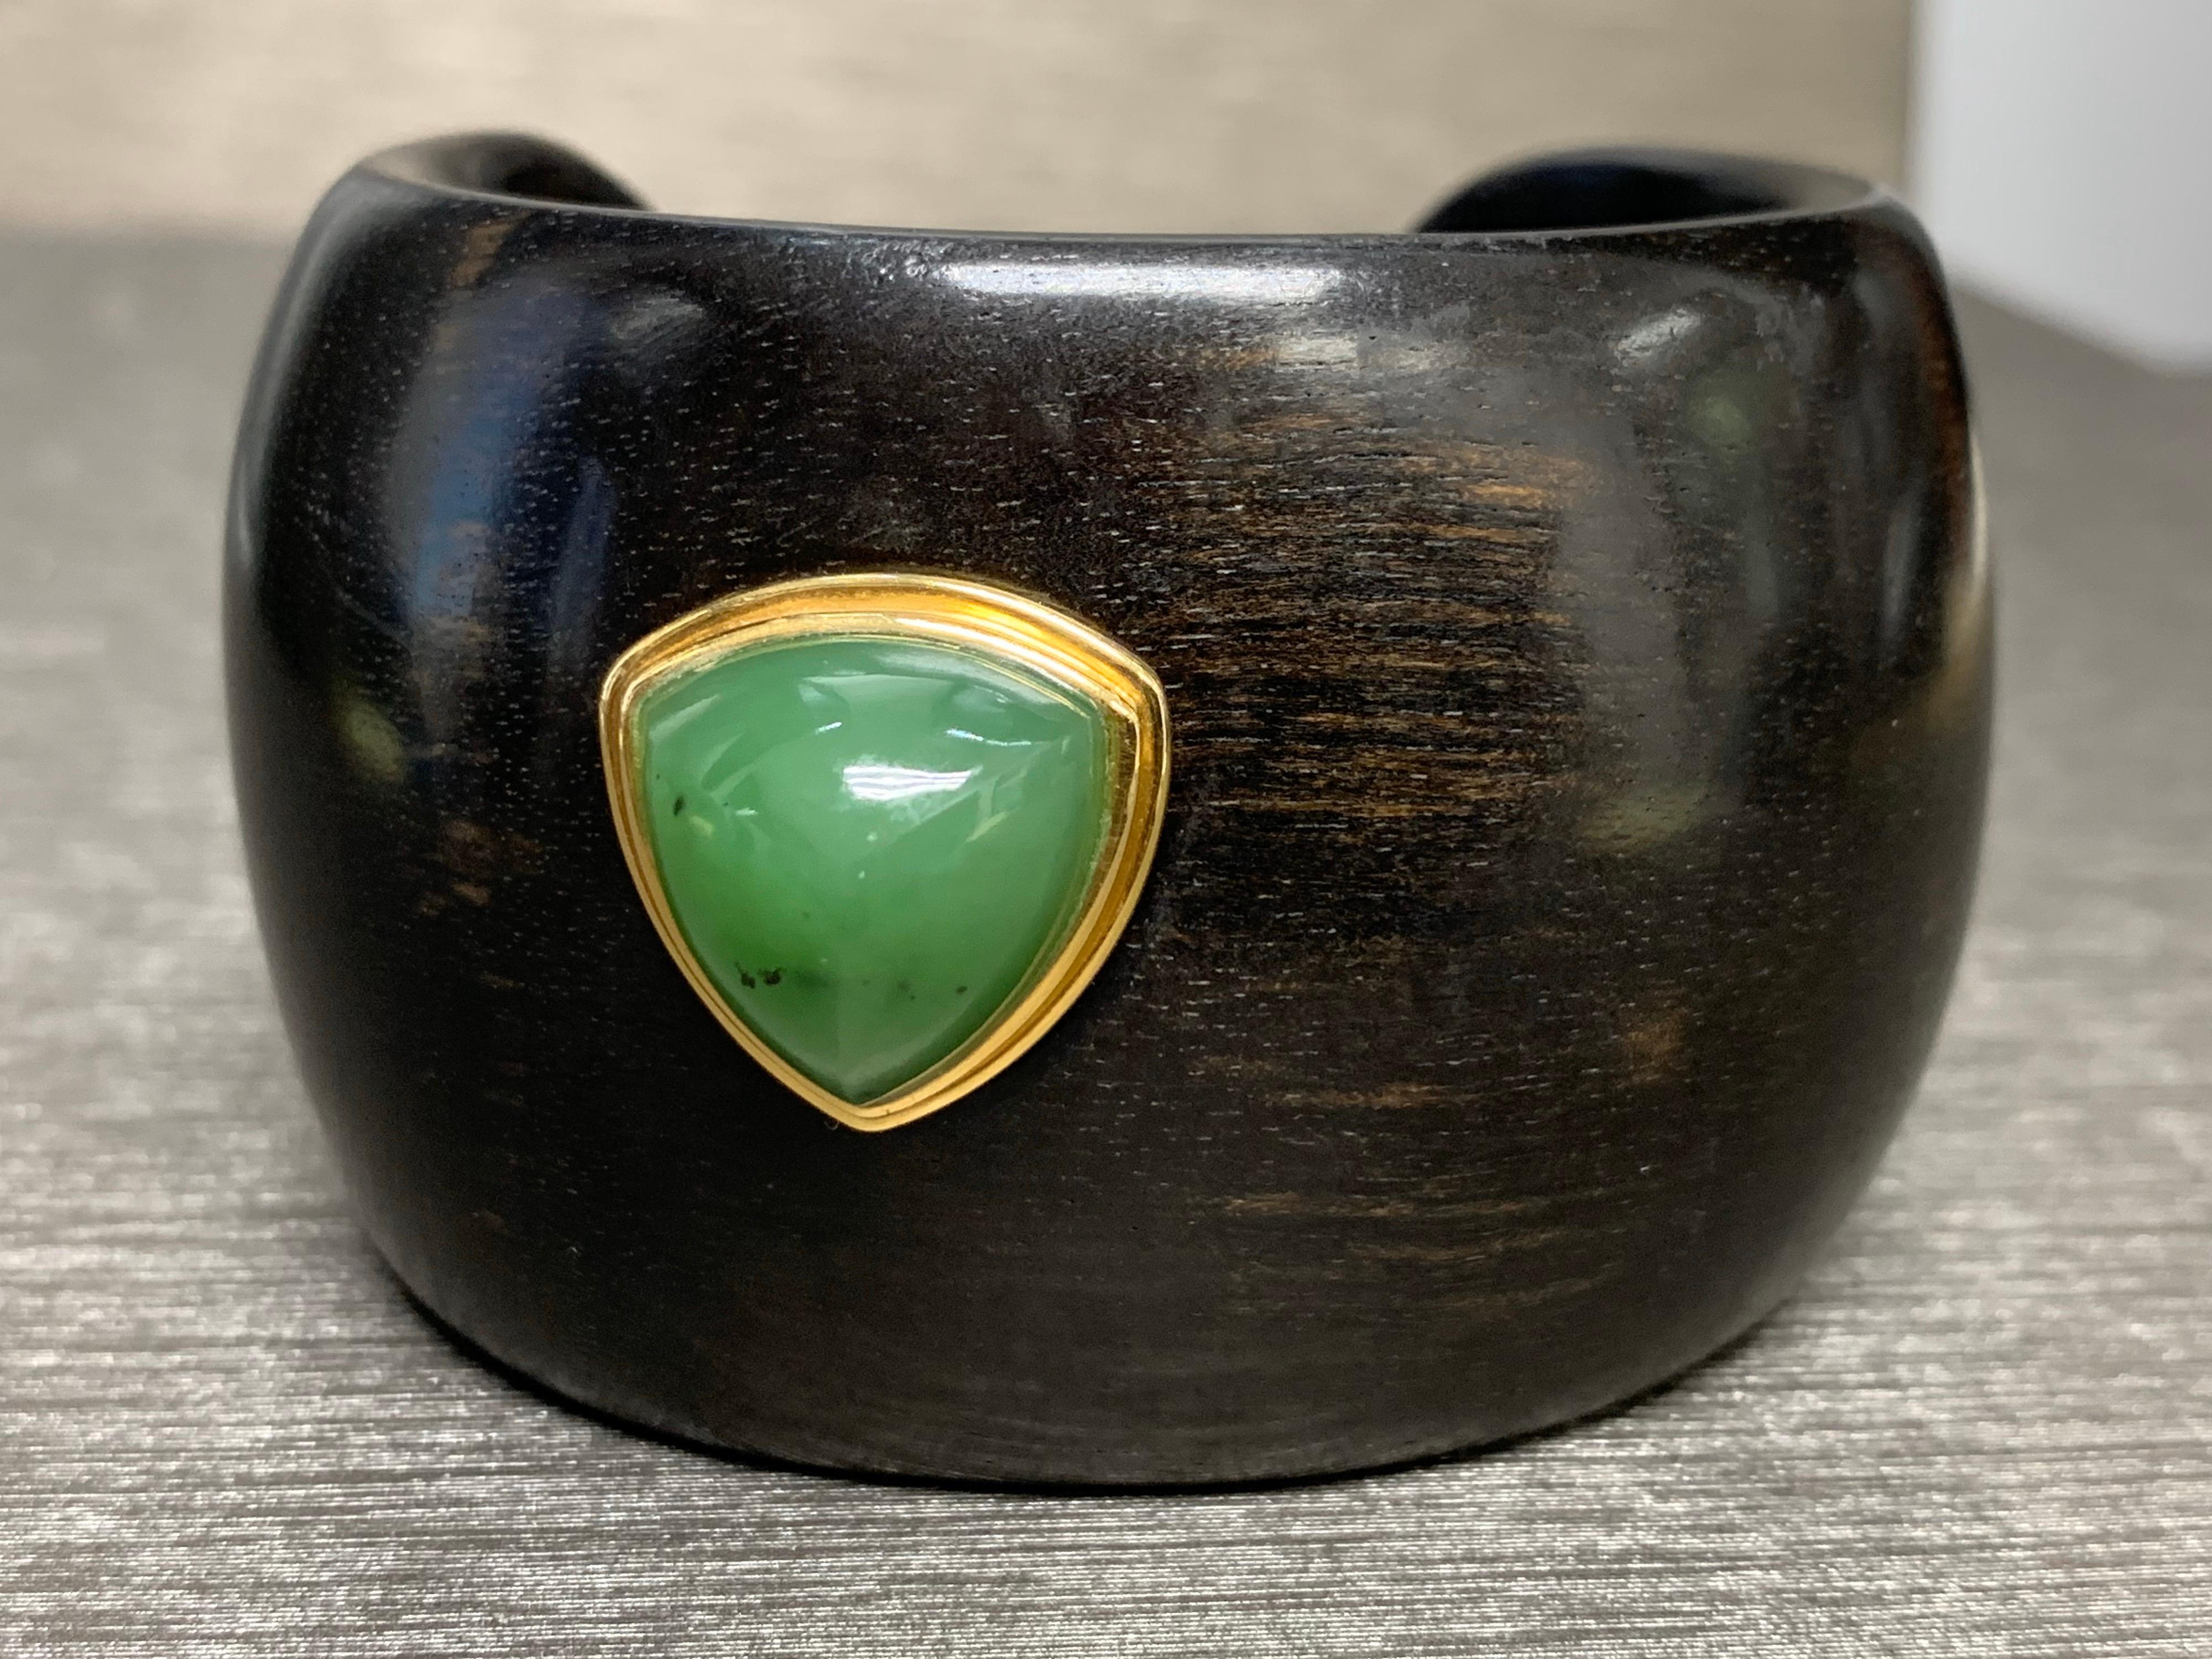 4.86 Carat Green Aventurine, Ebony Wood Bracelet, Made in Italy. 

Featuring a Green Aventurine Stone Ebony Wood Bracelet with a total weight of 4.86 carats, Hand Made in Italy

This one-of-a-kind bracelet was created by hand in Italy is certified,